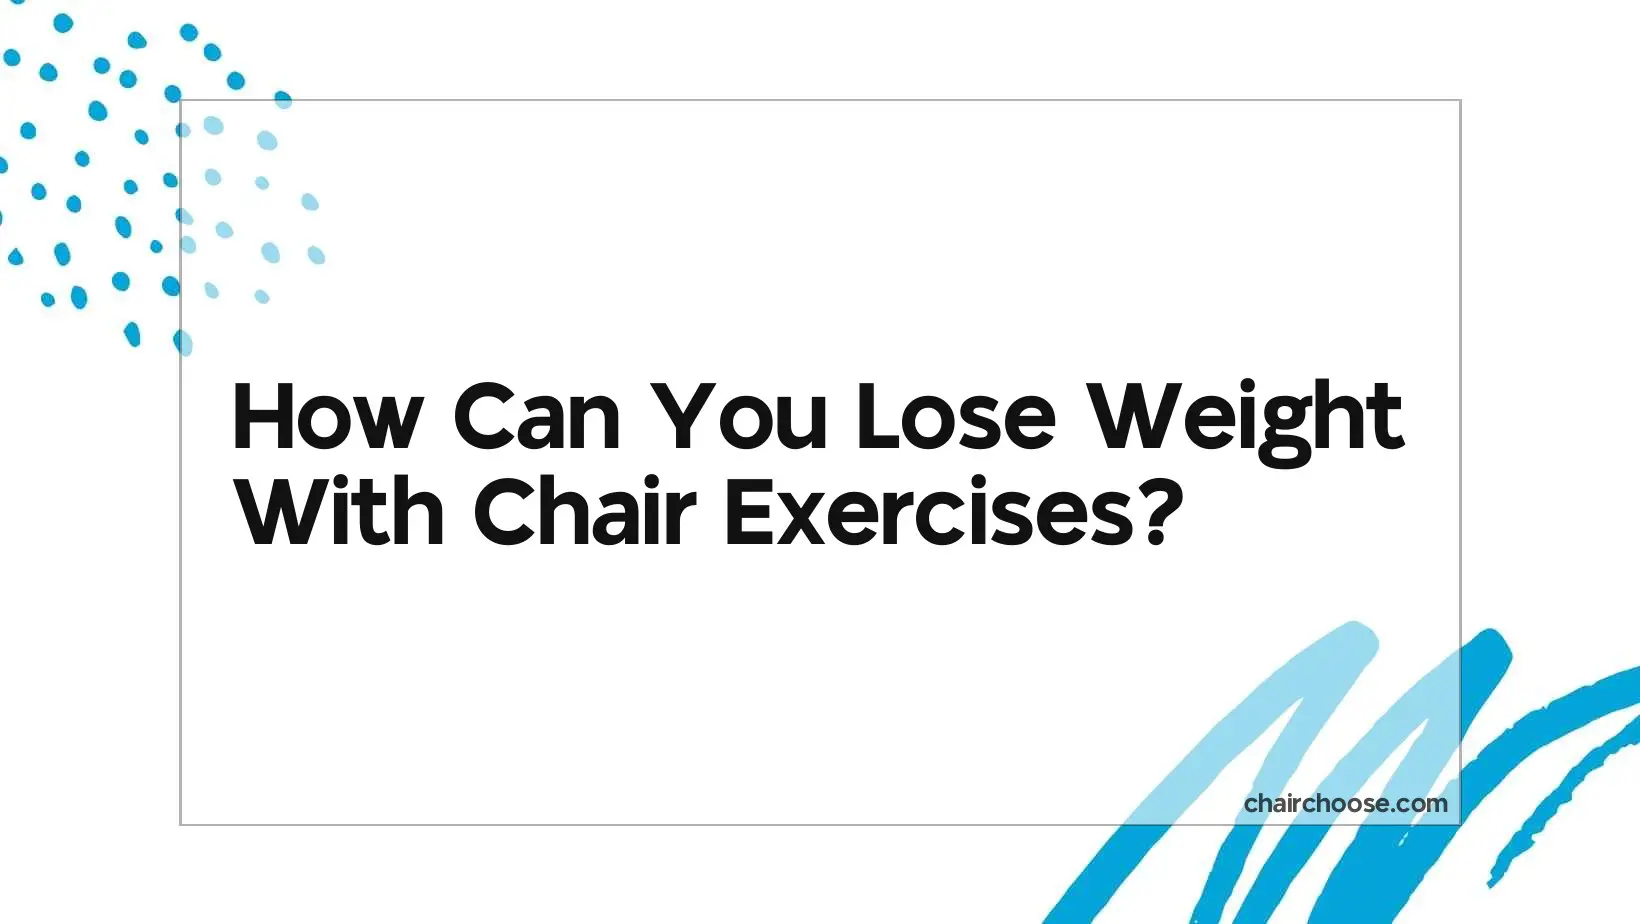 How Can You Lose Weight With Chair Exercises?